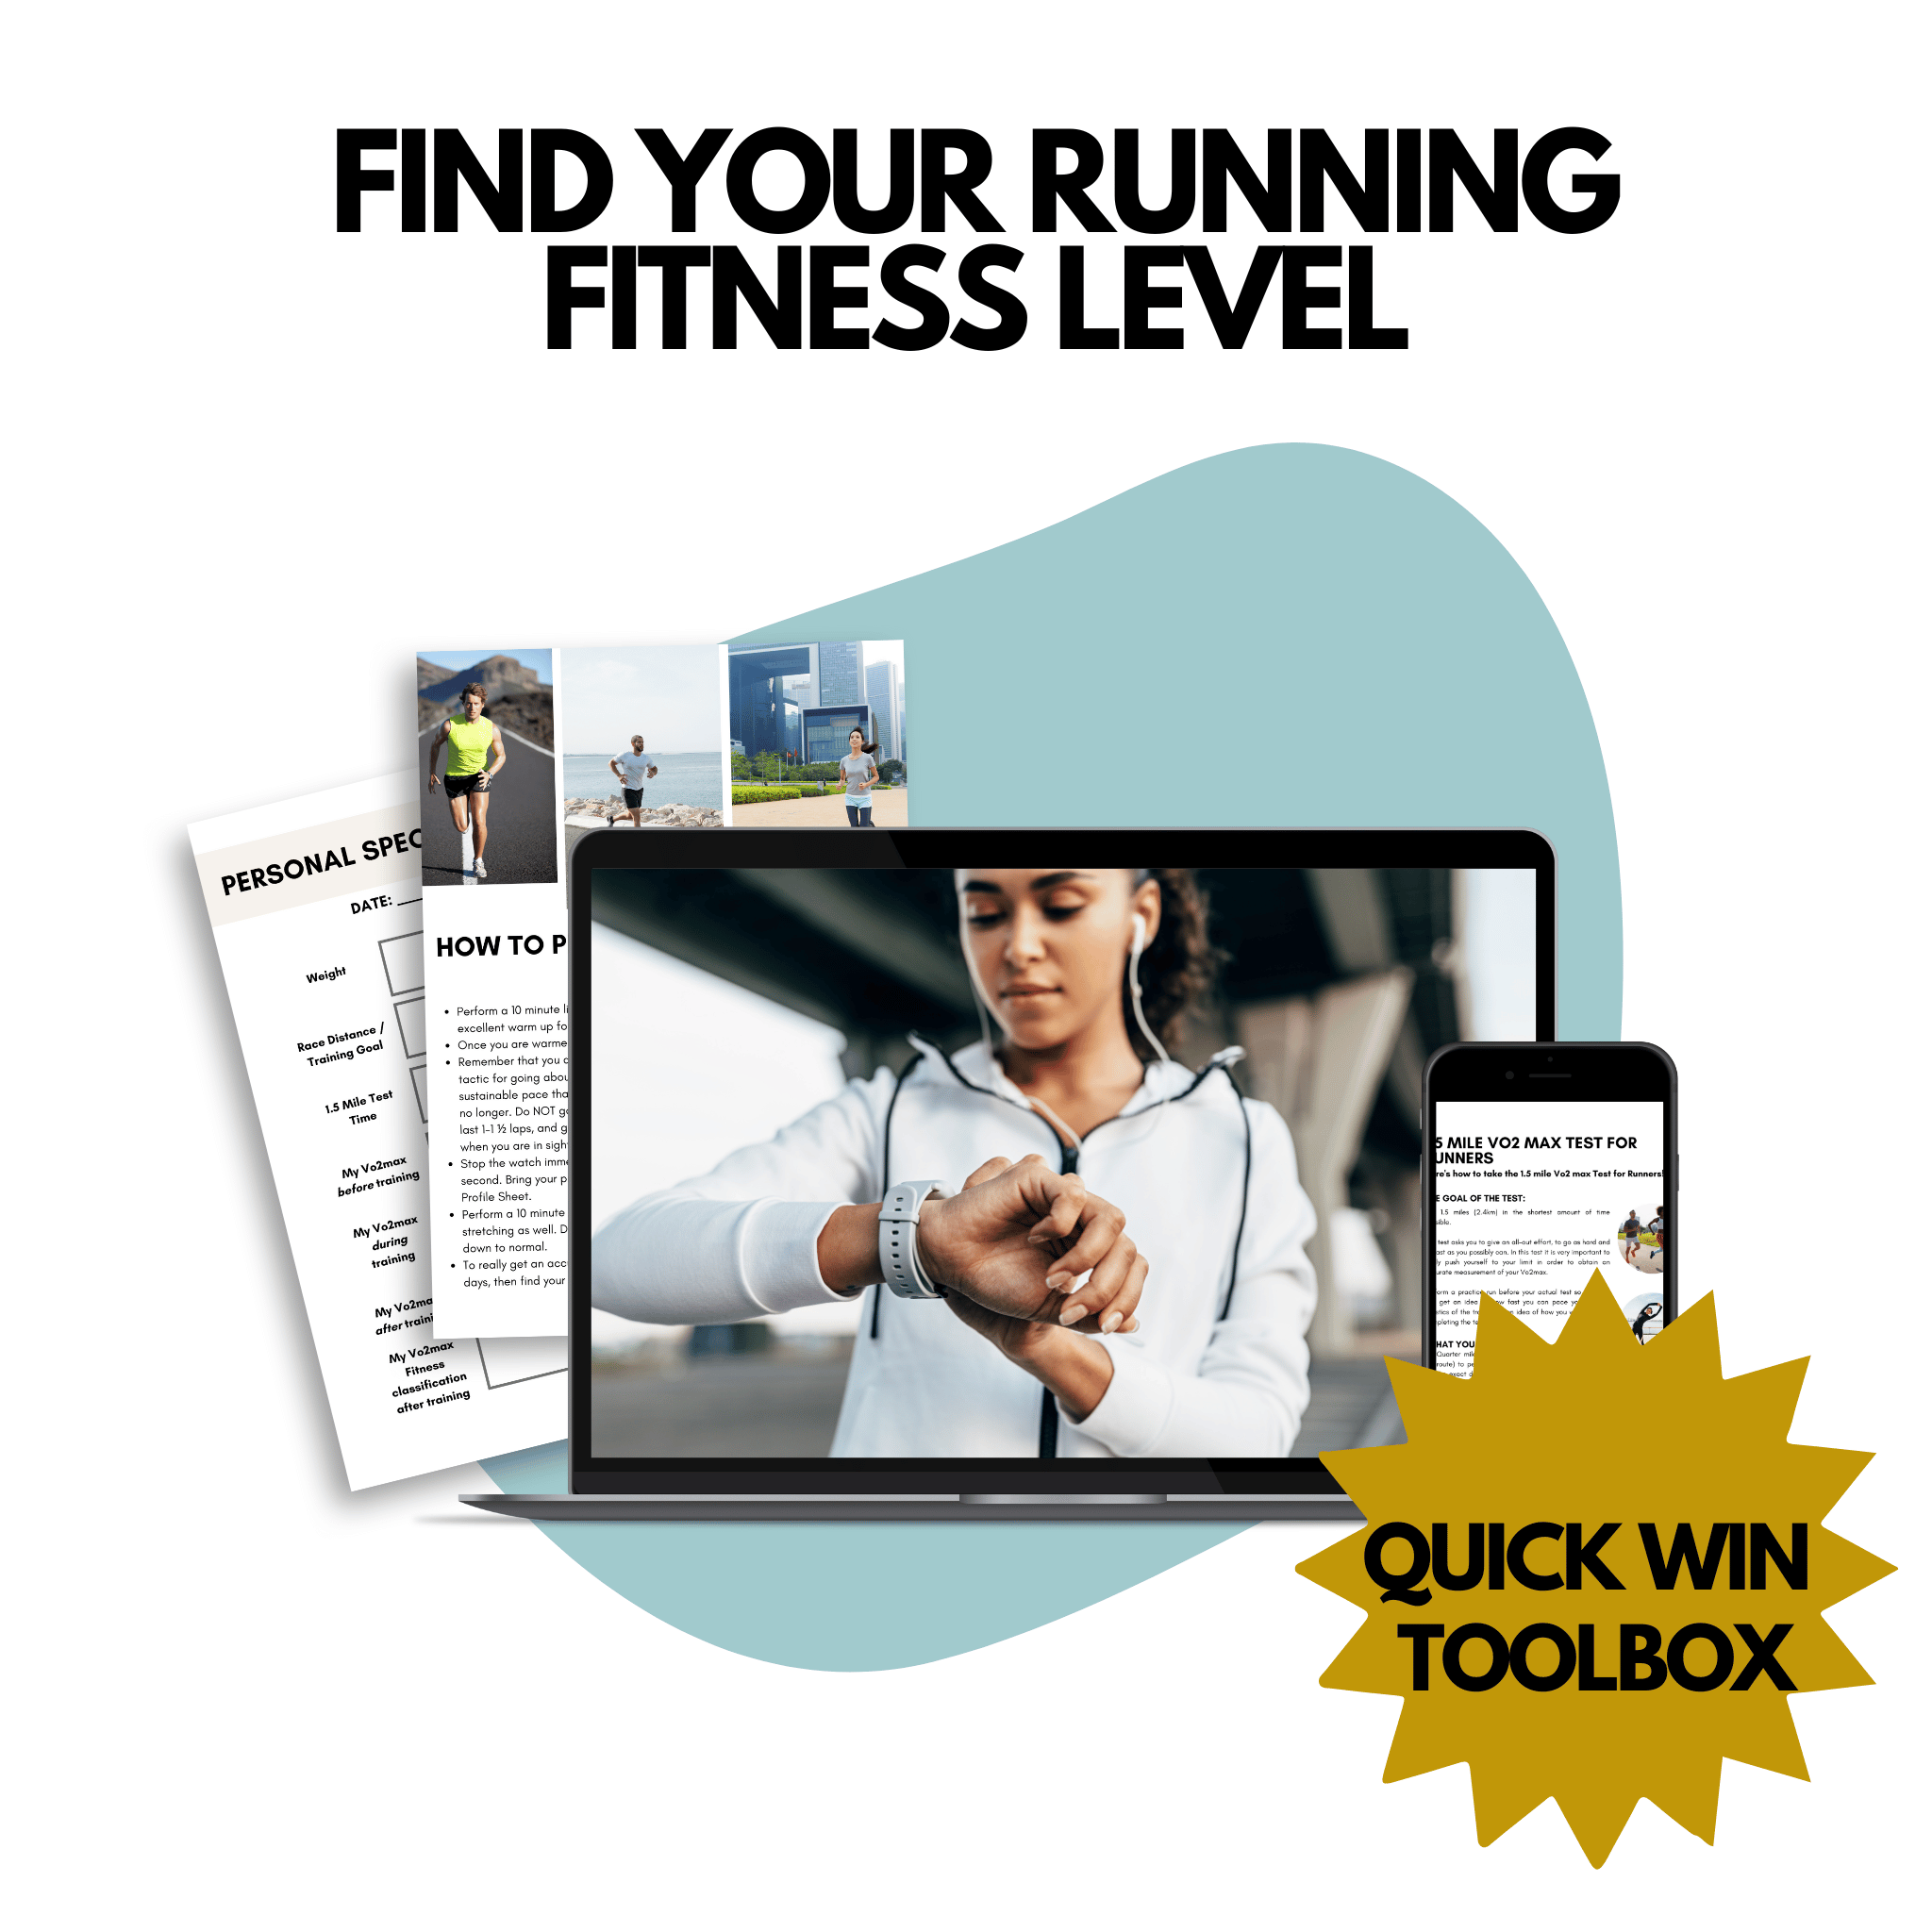 A Mockup of the Running Fitness Level Toolbox for Runners